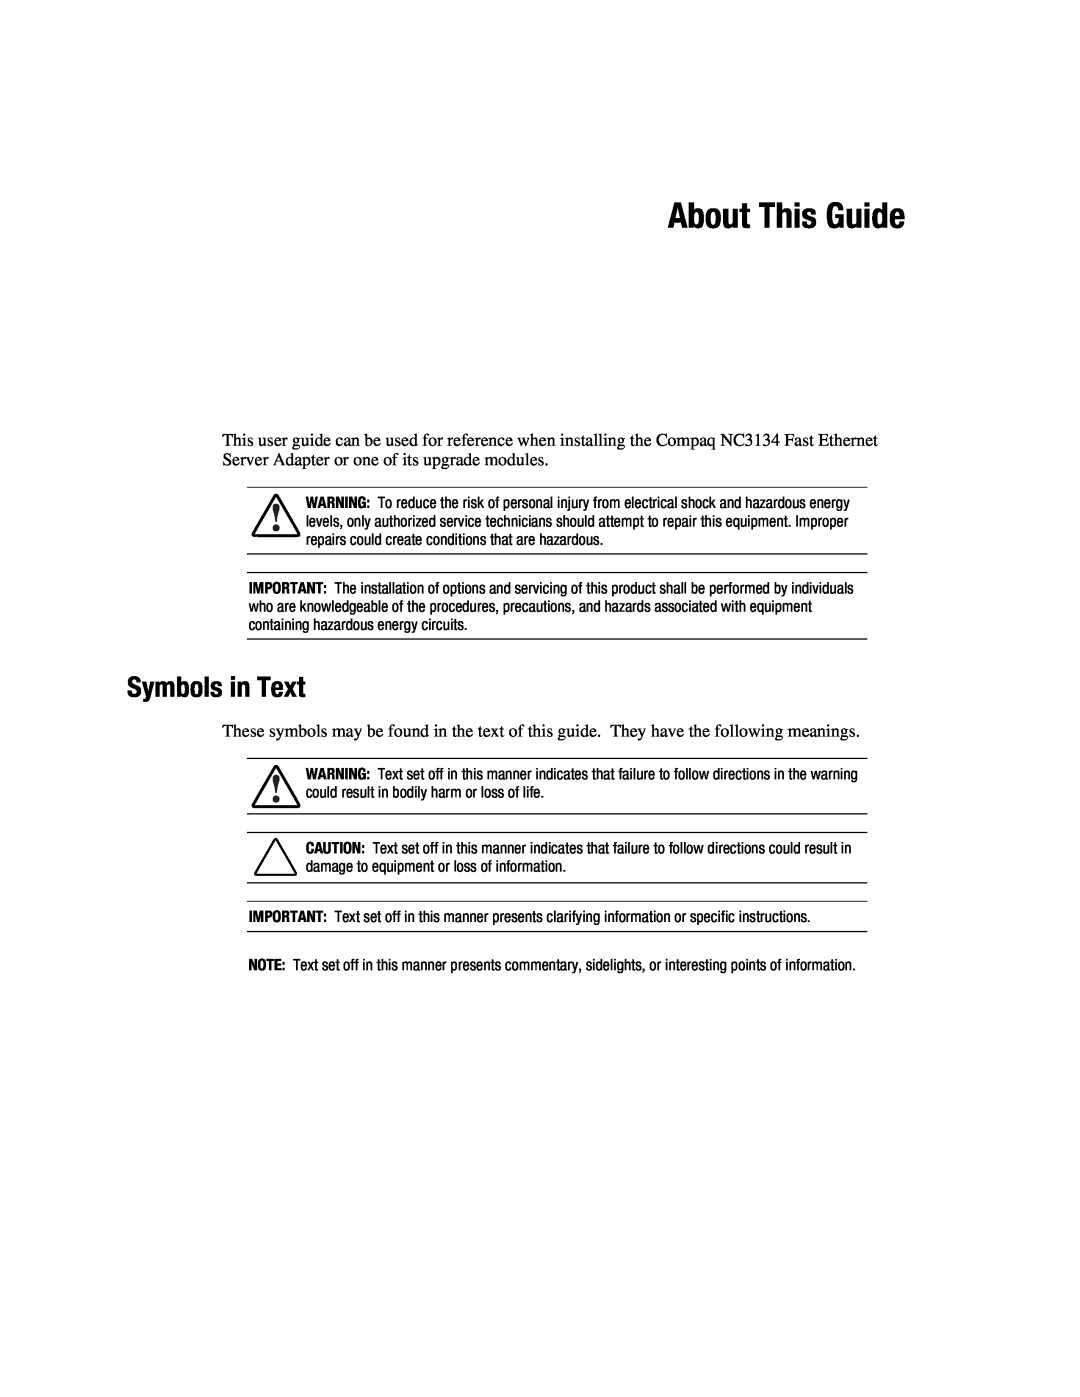 Compaq 3134 manual About This Guide, Symbols in Text 